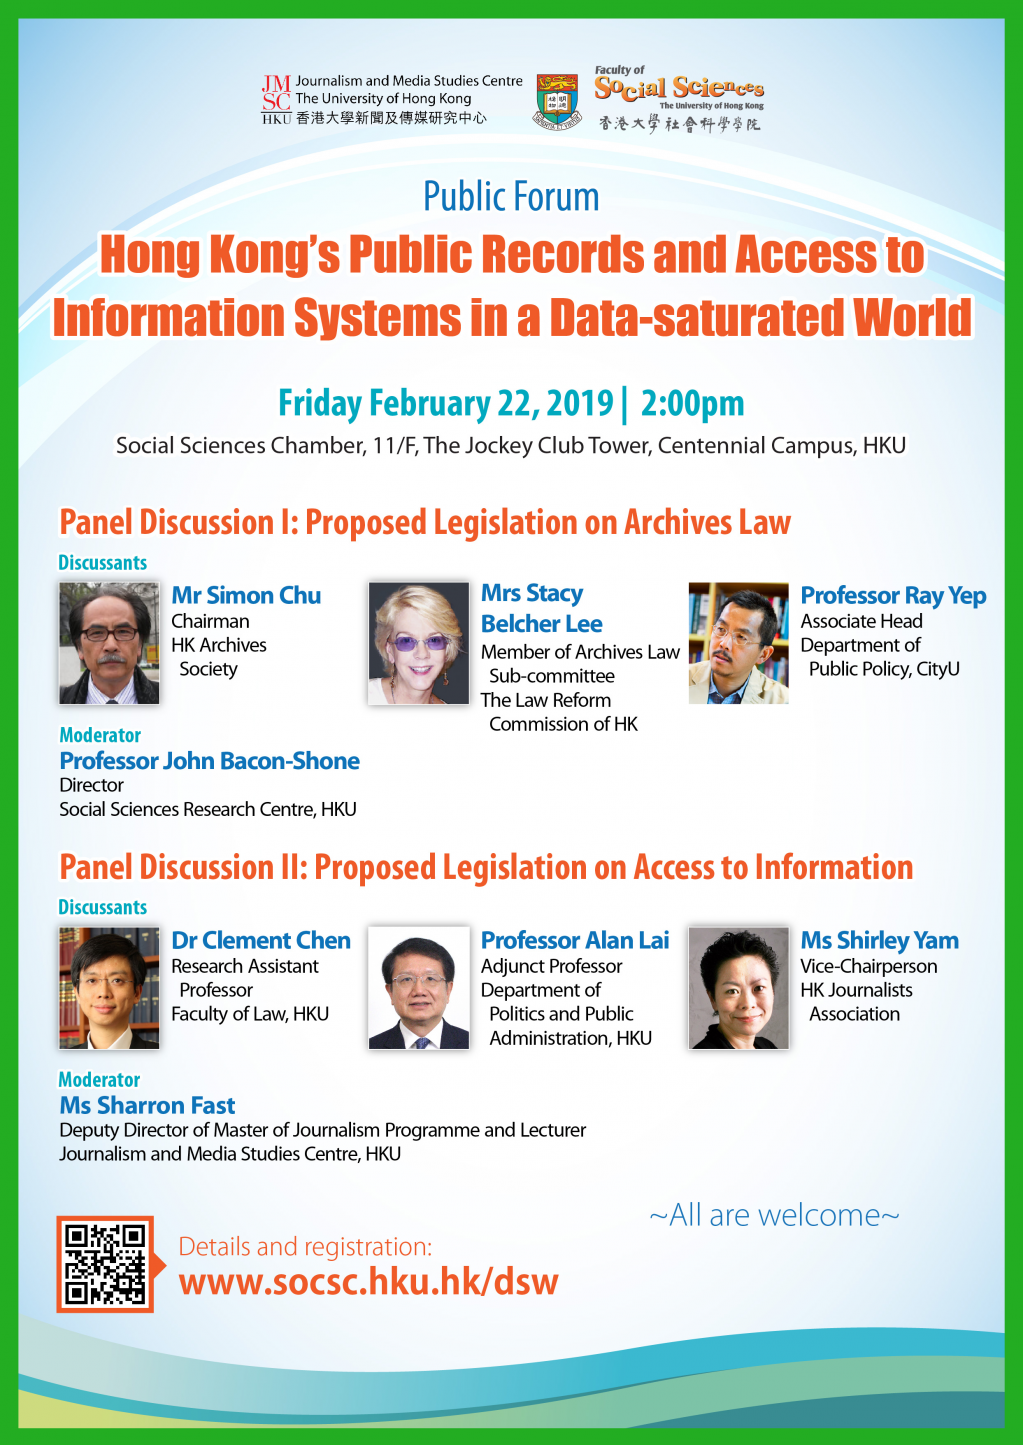 Public Forum on Hong Kong's Public Records and Access to Information Systems in a Data-saturated World